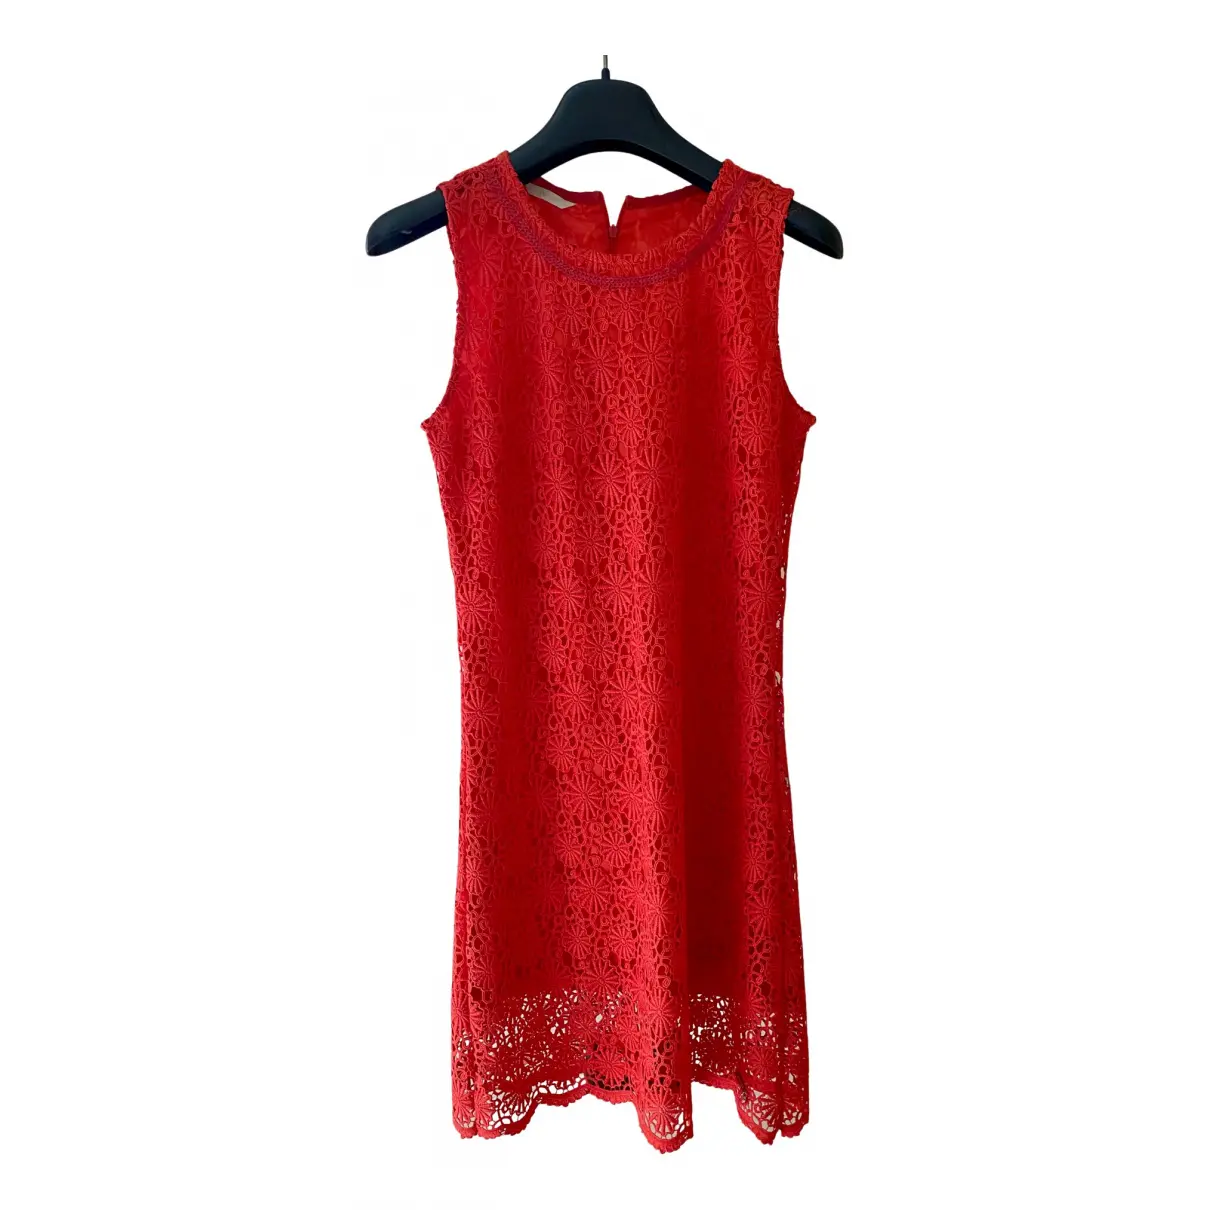 Lace mid-length dress GUESS